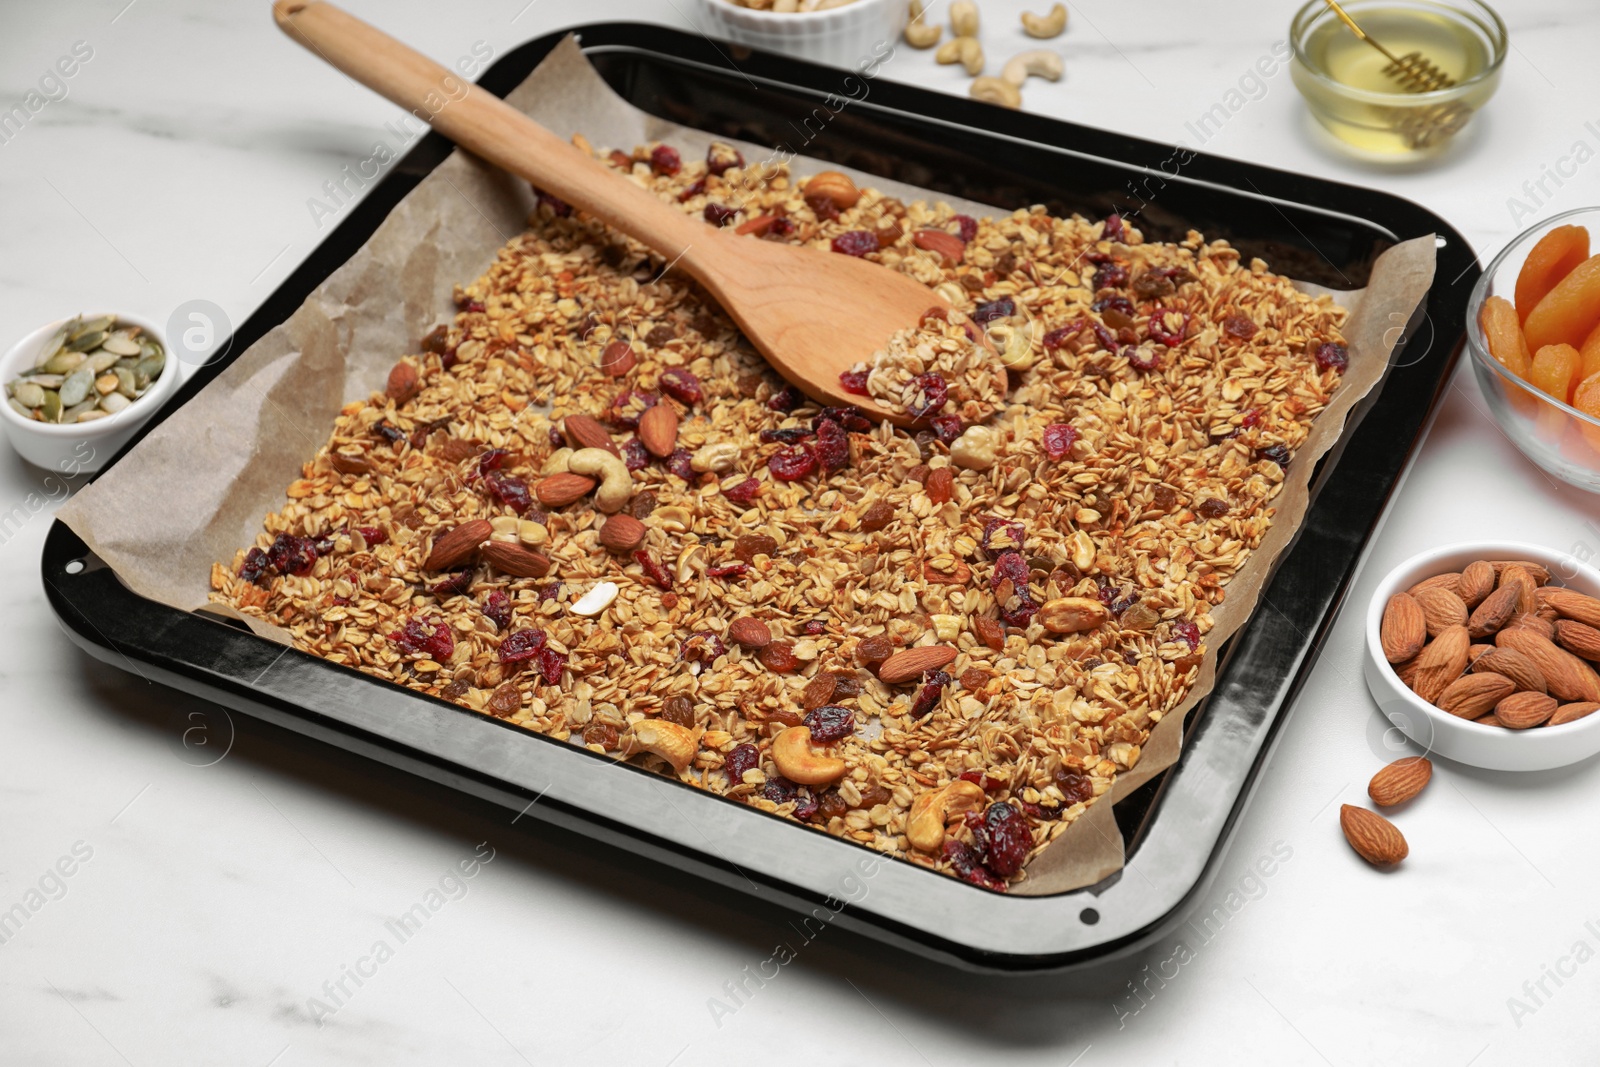 Photo of Tray with tasty granola, nuts and dry fruits on white marble table